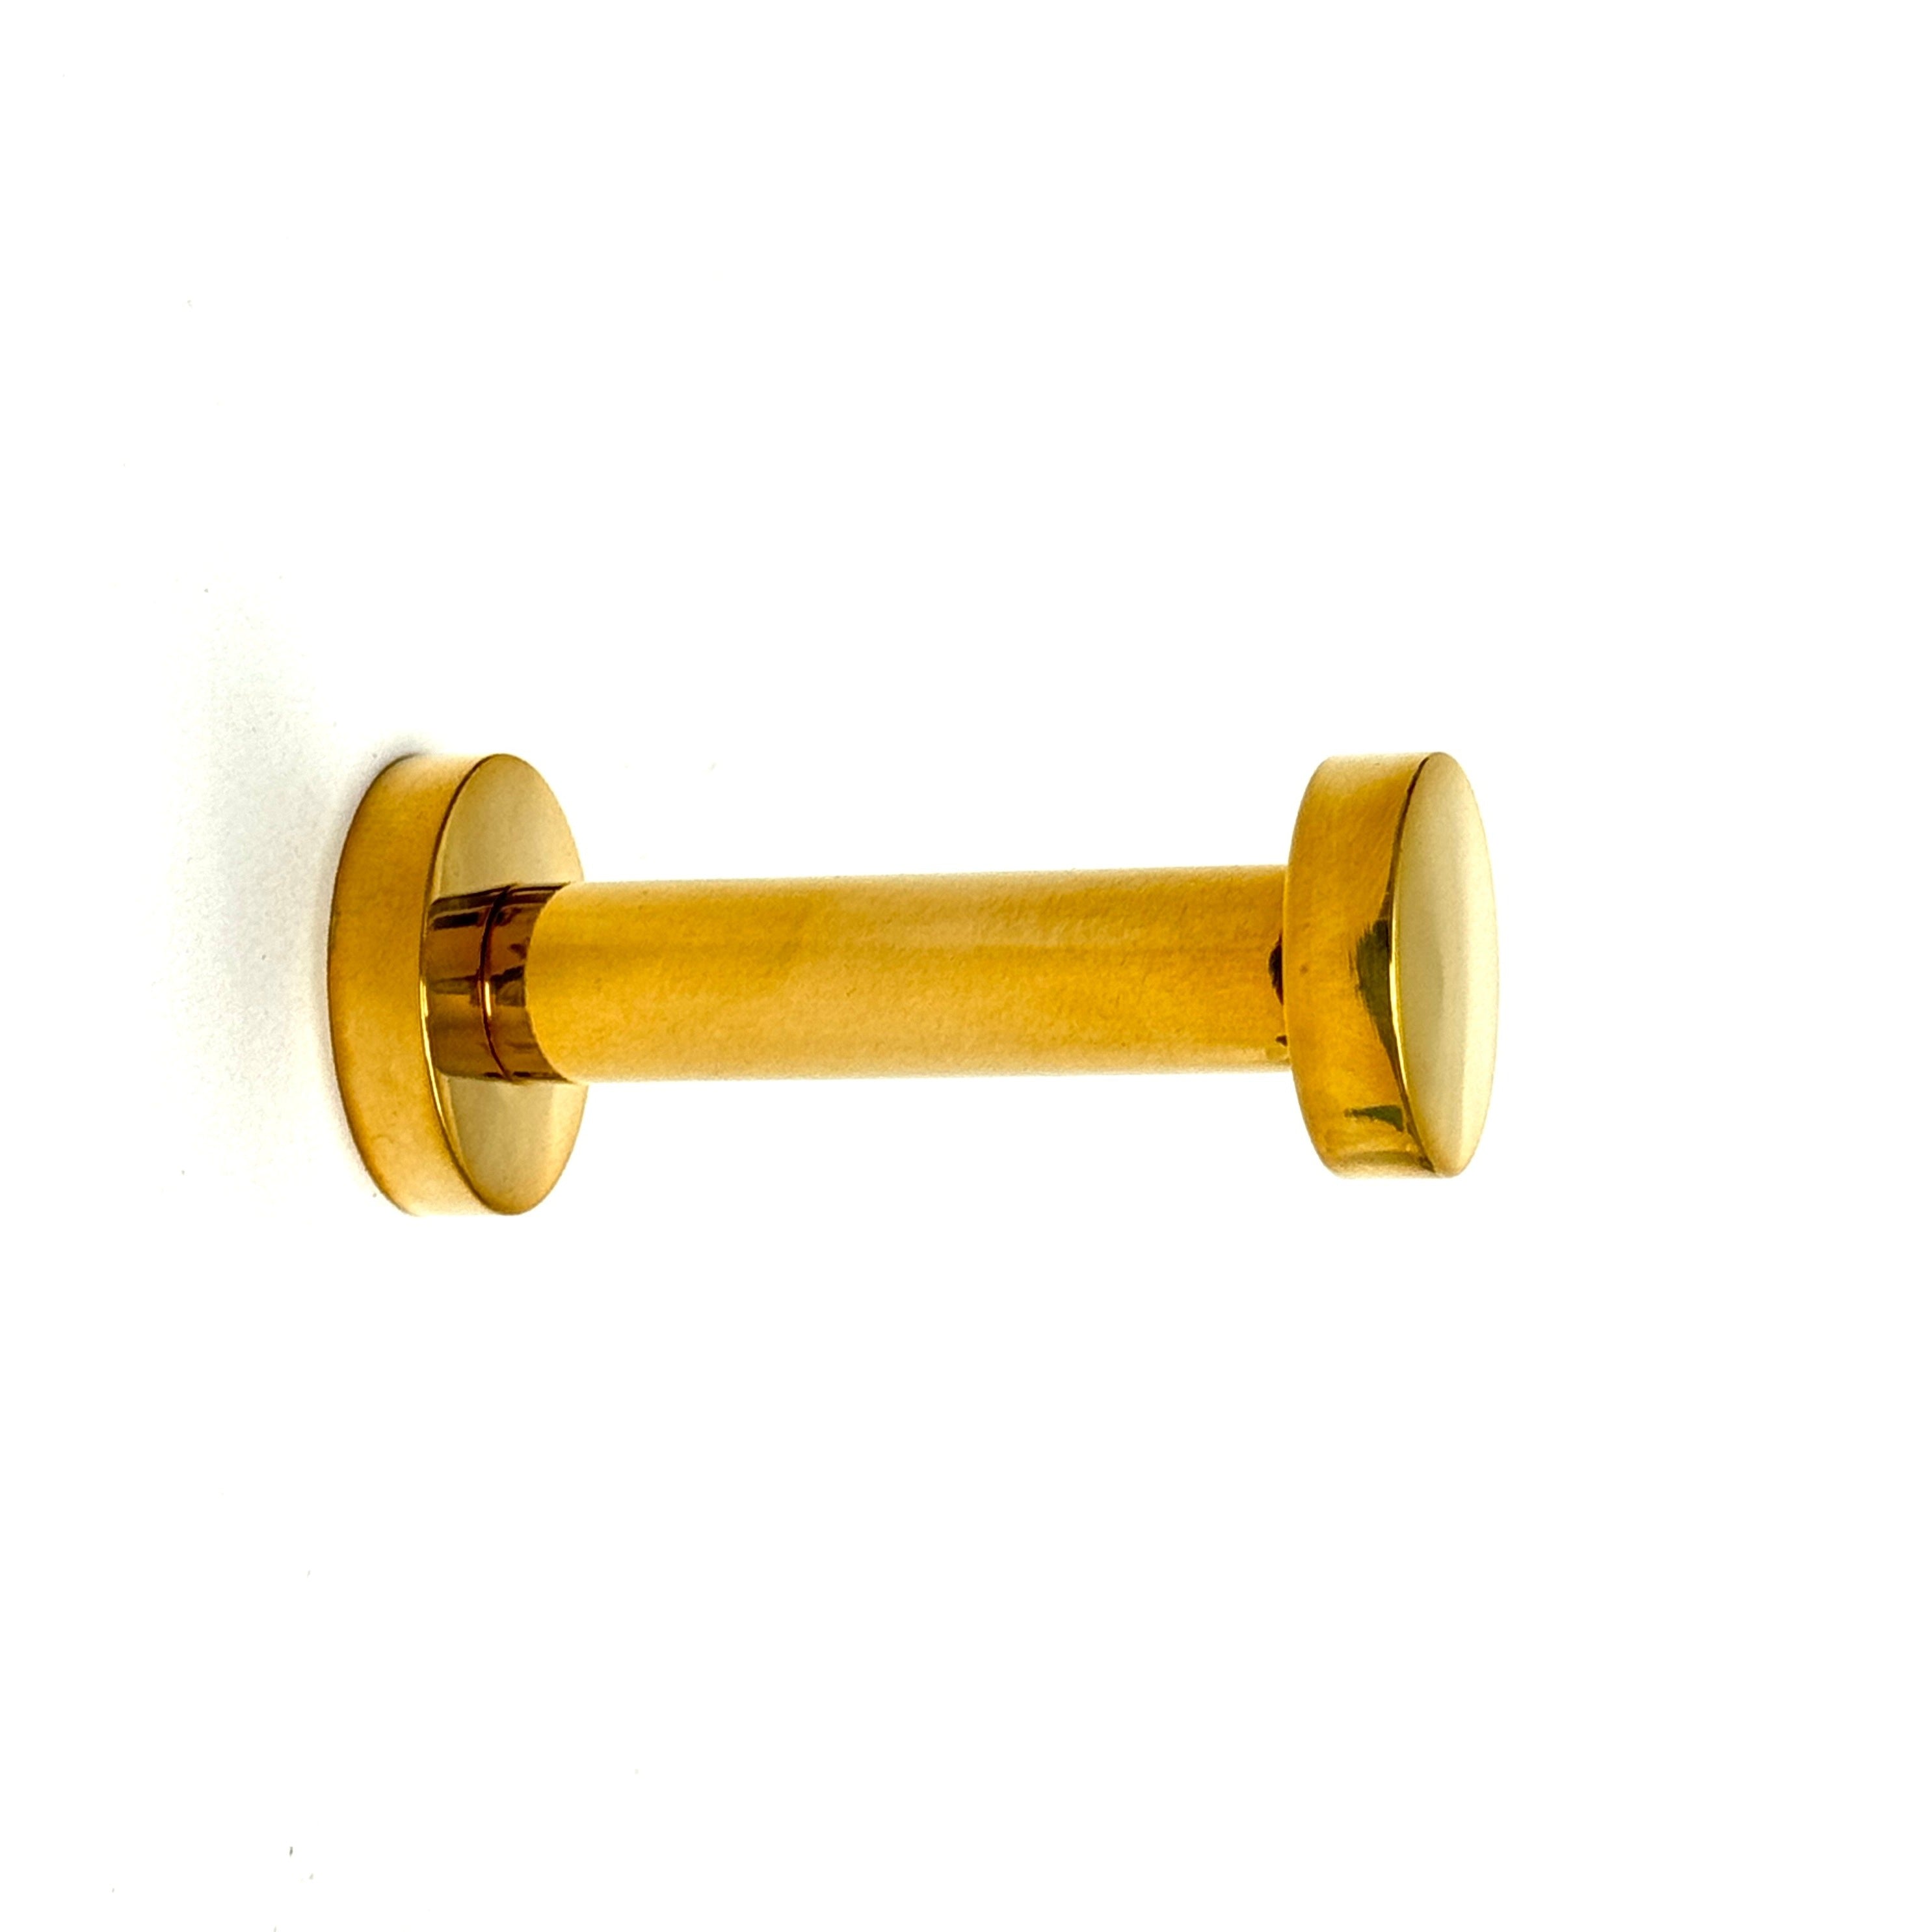 Polished Unlacquered Brass "Post" Hook - Industry Hardware